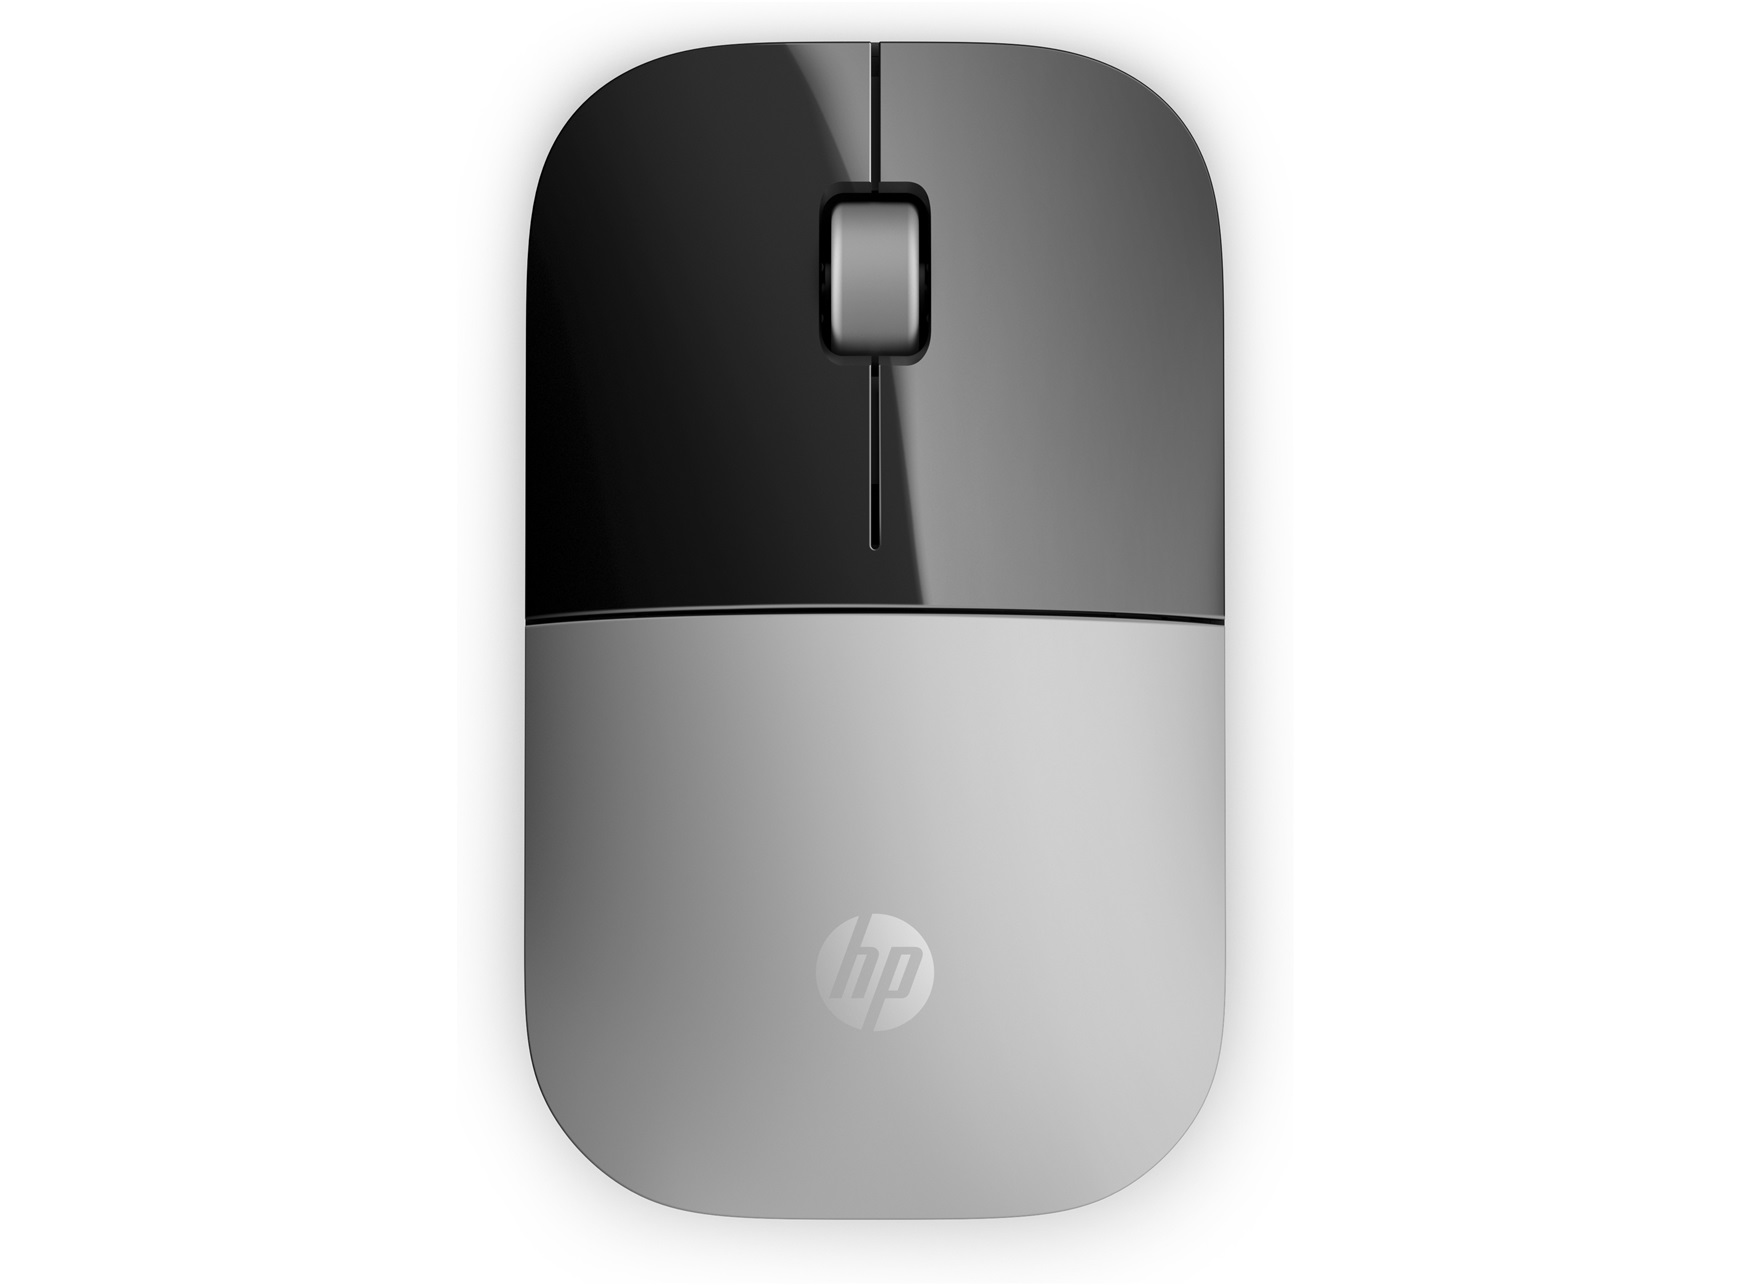 HP Z3700 Wireless Mouse, X7Q44AA